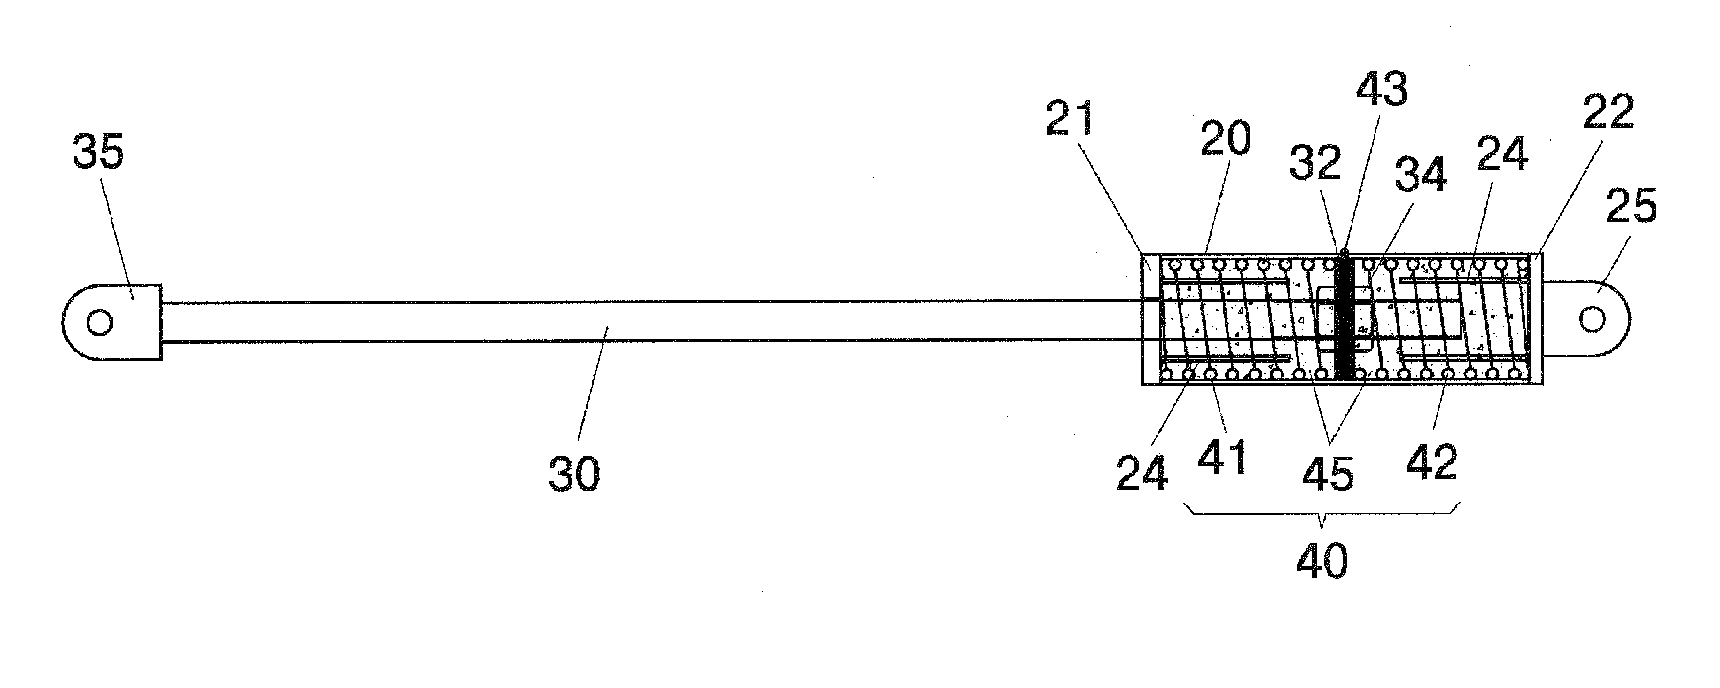 Damping device for building seismic reinforcement